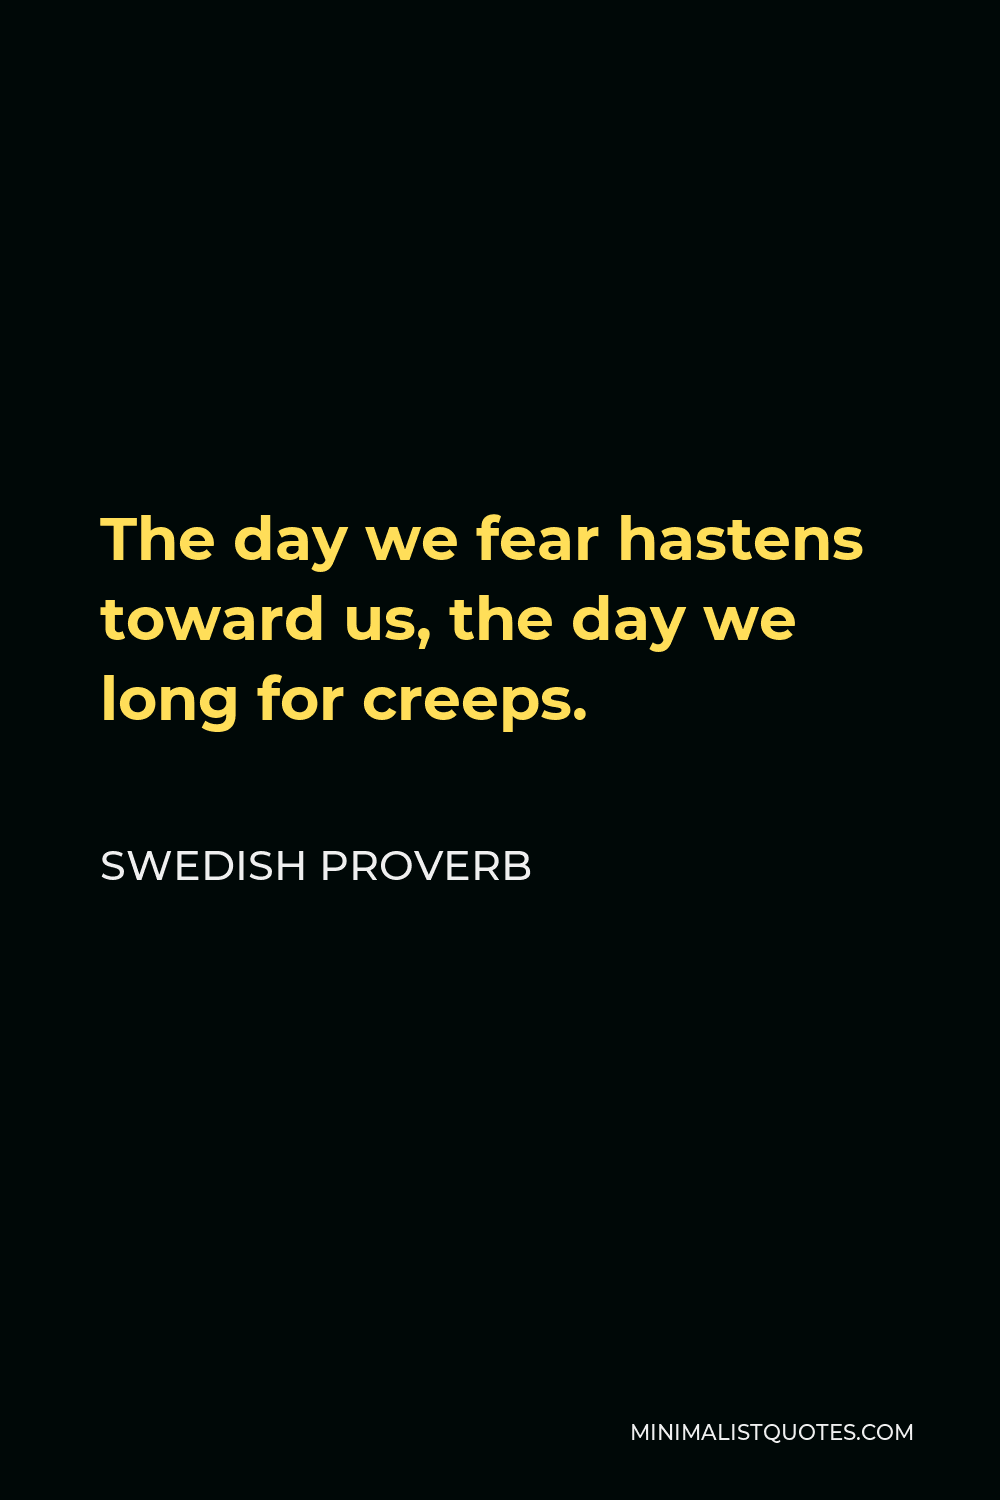 Swedish Proverb Quote - The day we fear hastens toward us, the day we long for creeps.